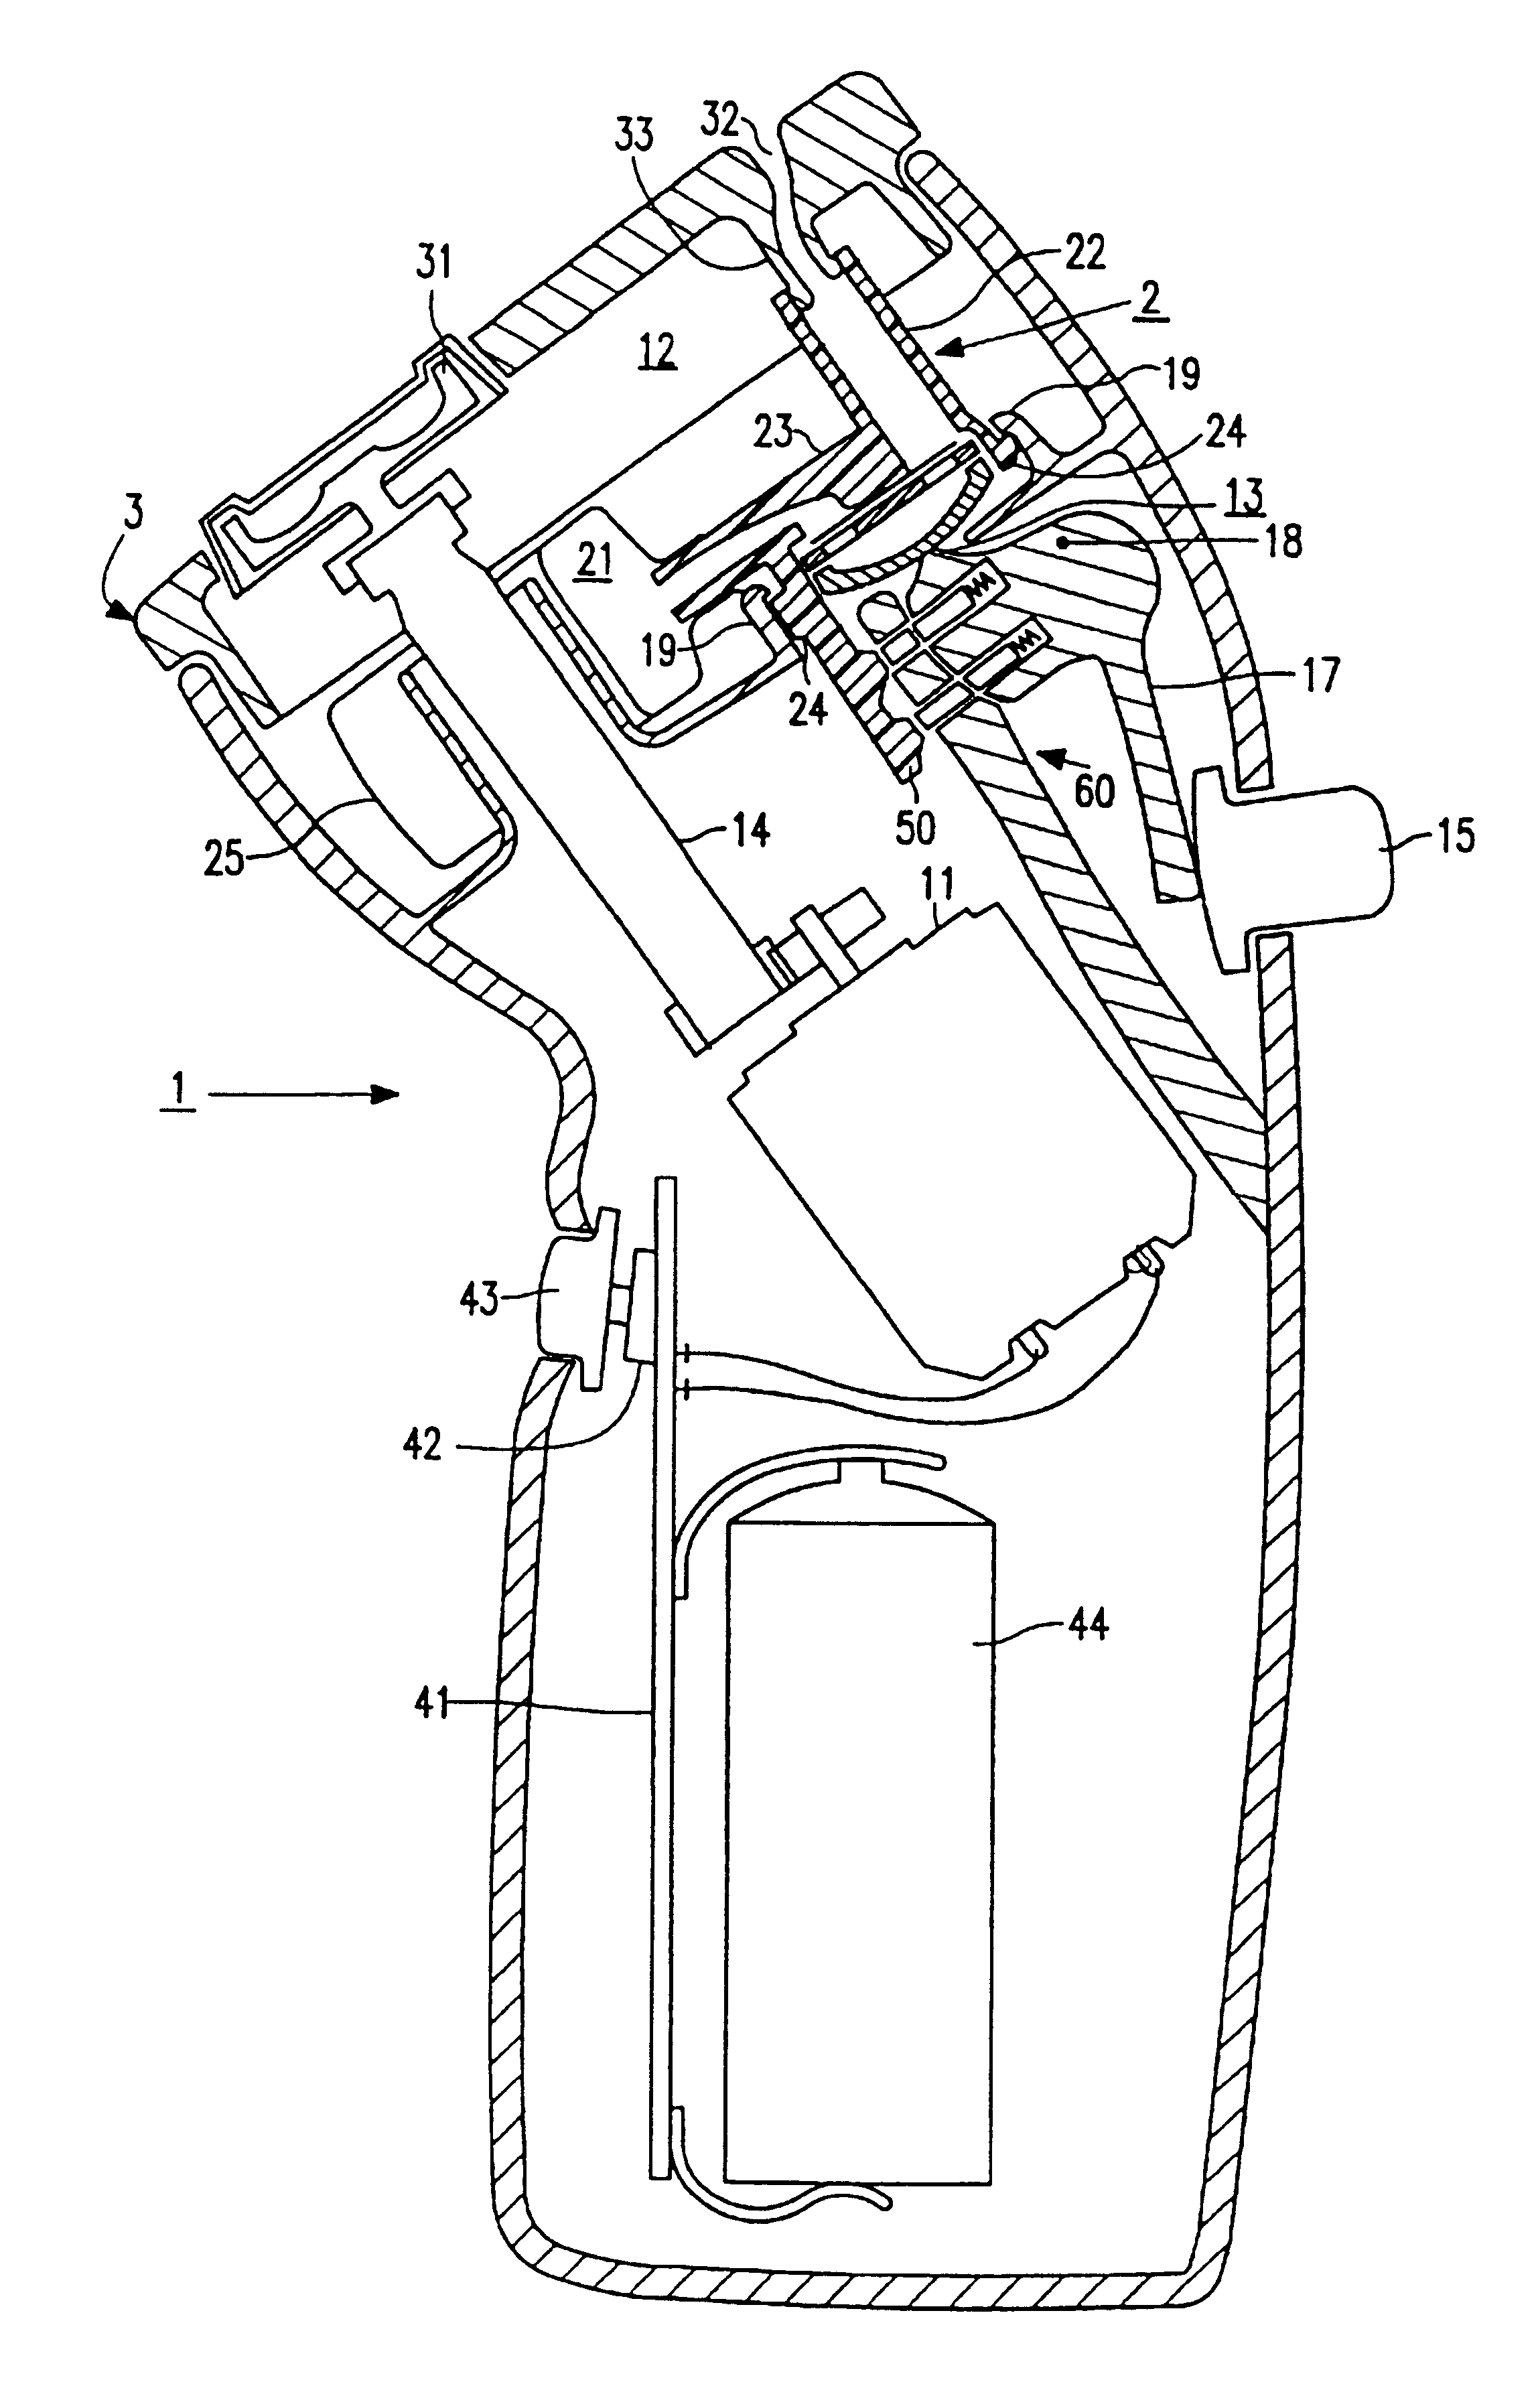 System appliance and cartridge for personal body care